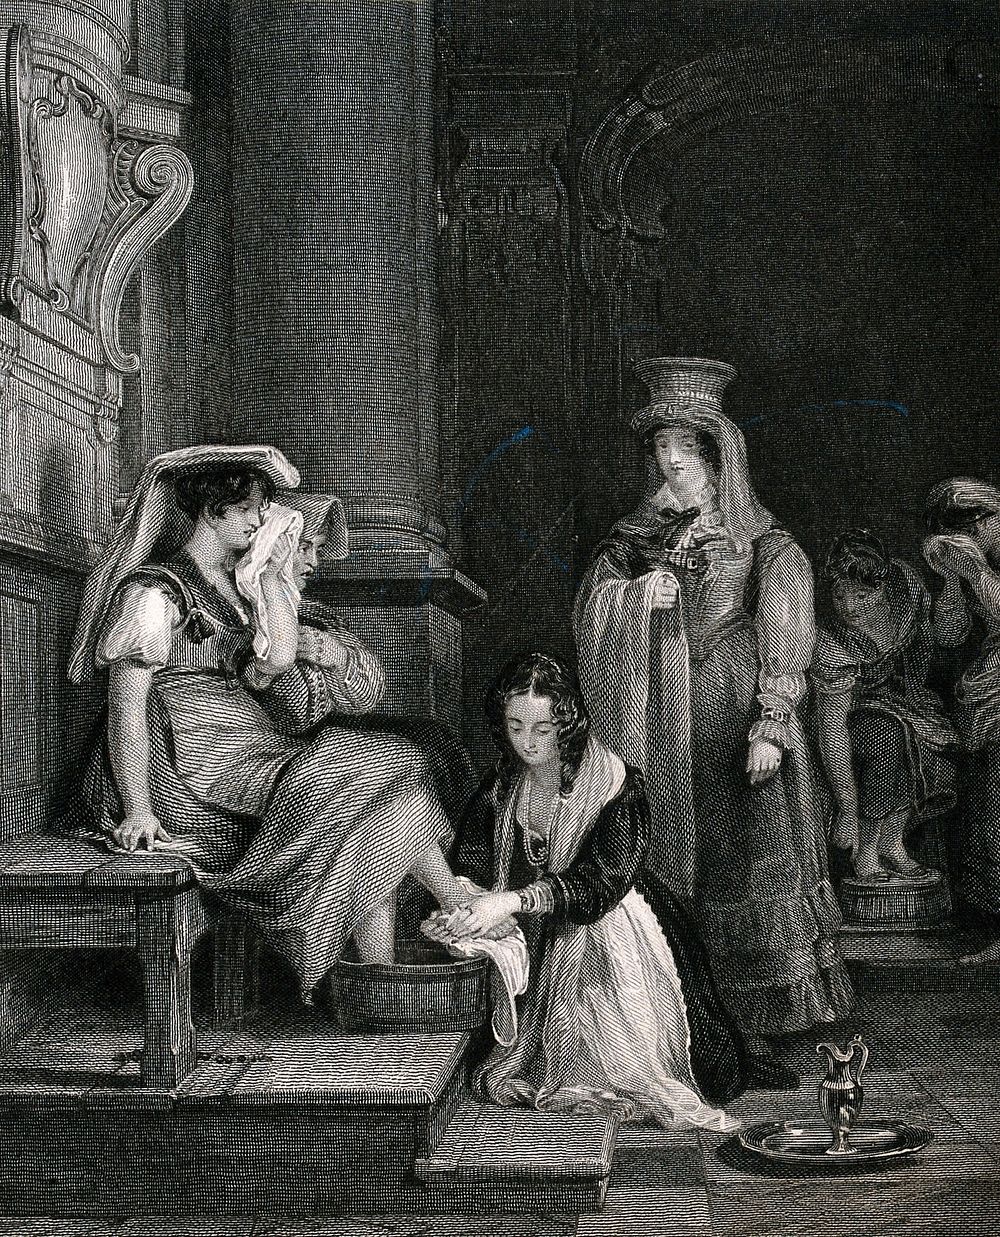 A woman washes the feet of another woman in a church. Engraving.